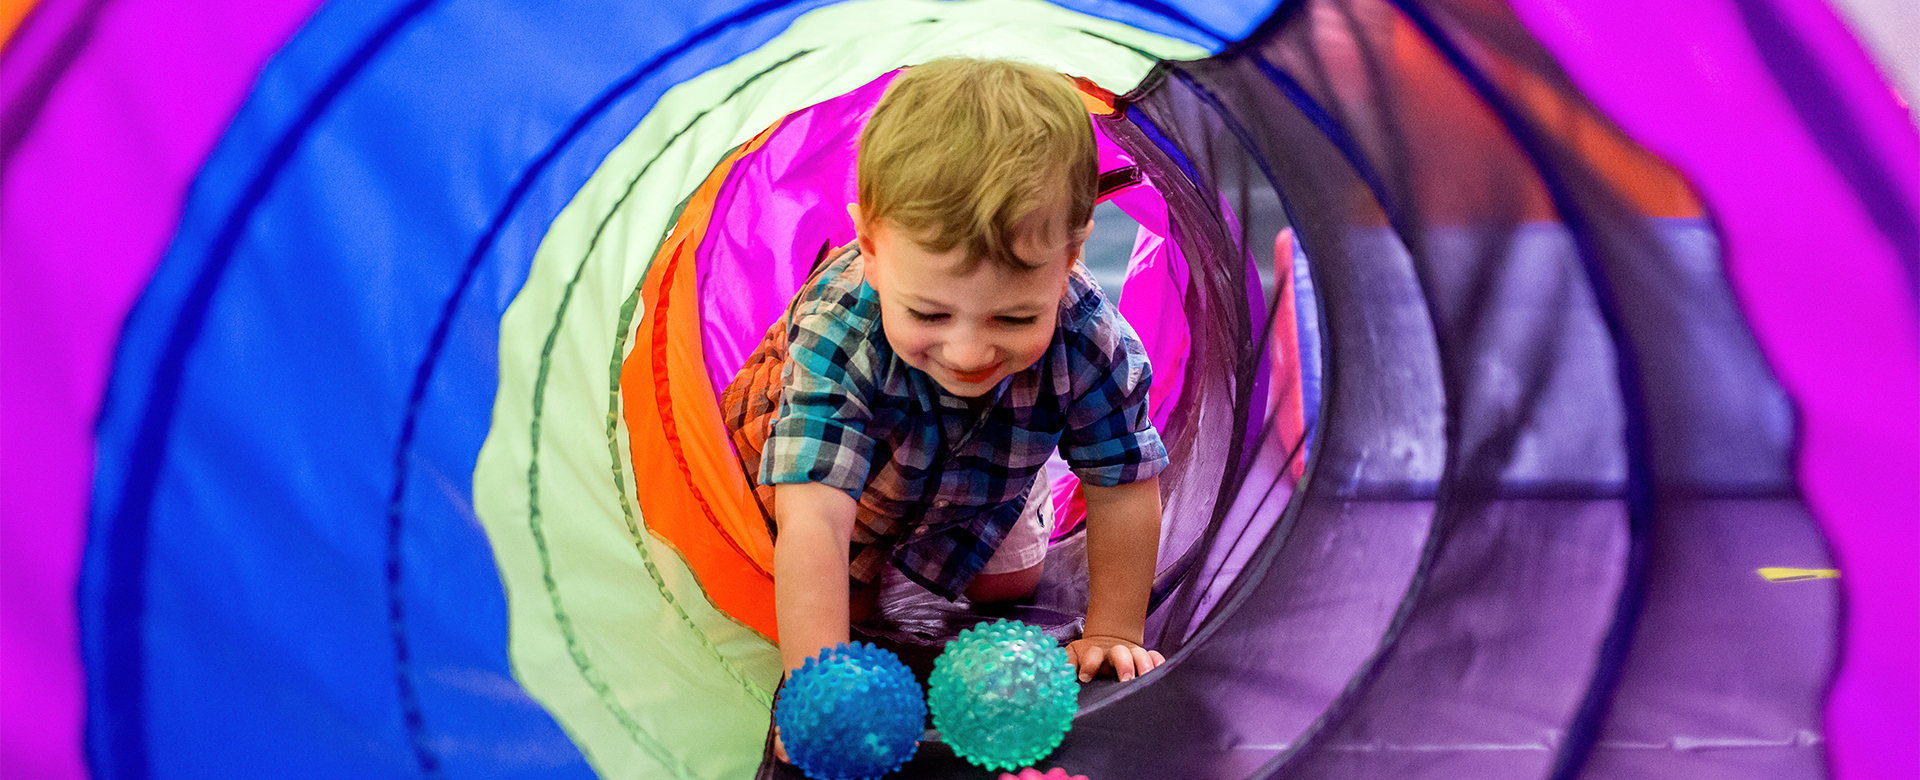 child crawling through colorful tunnel full width